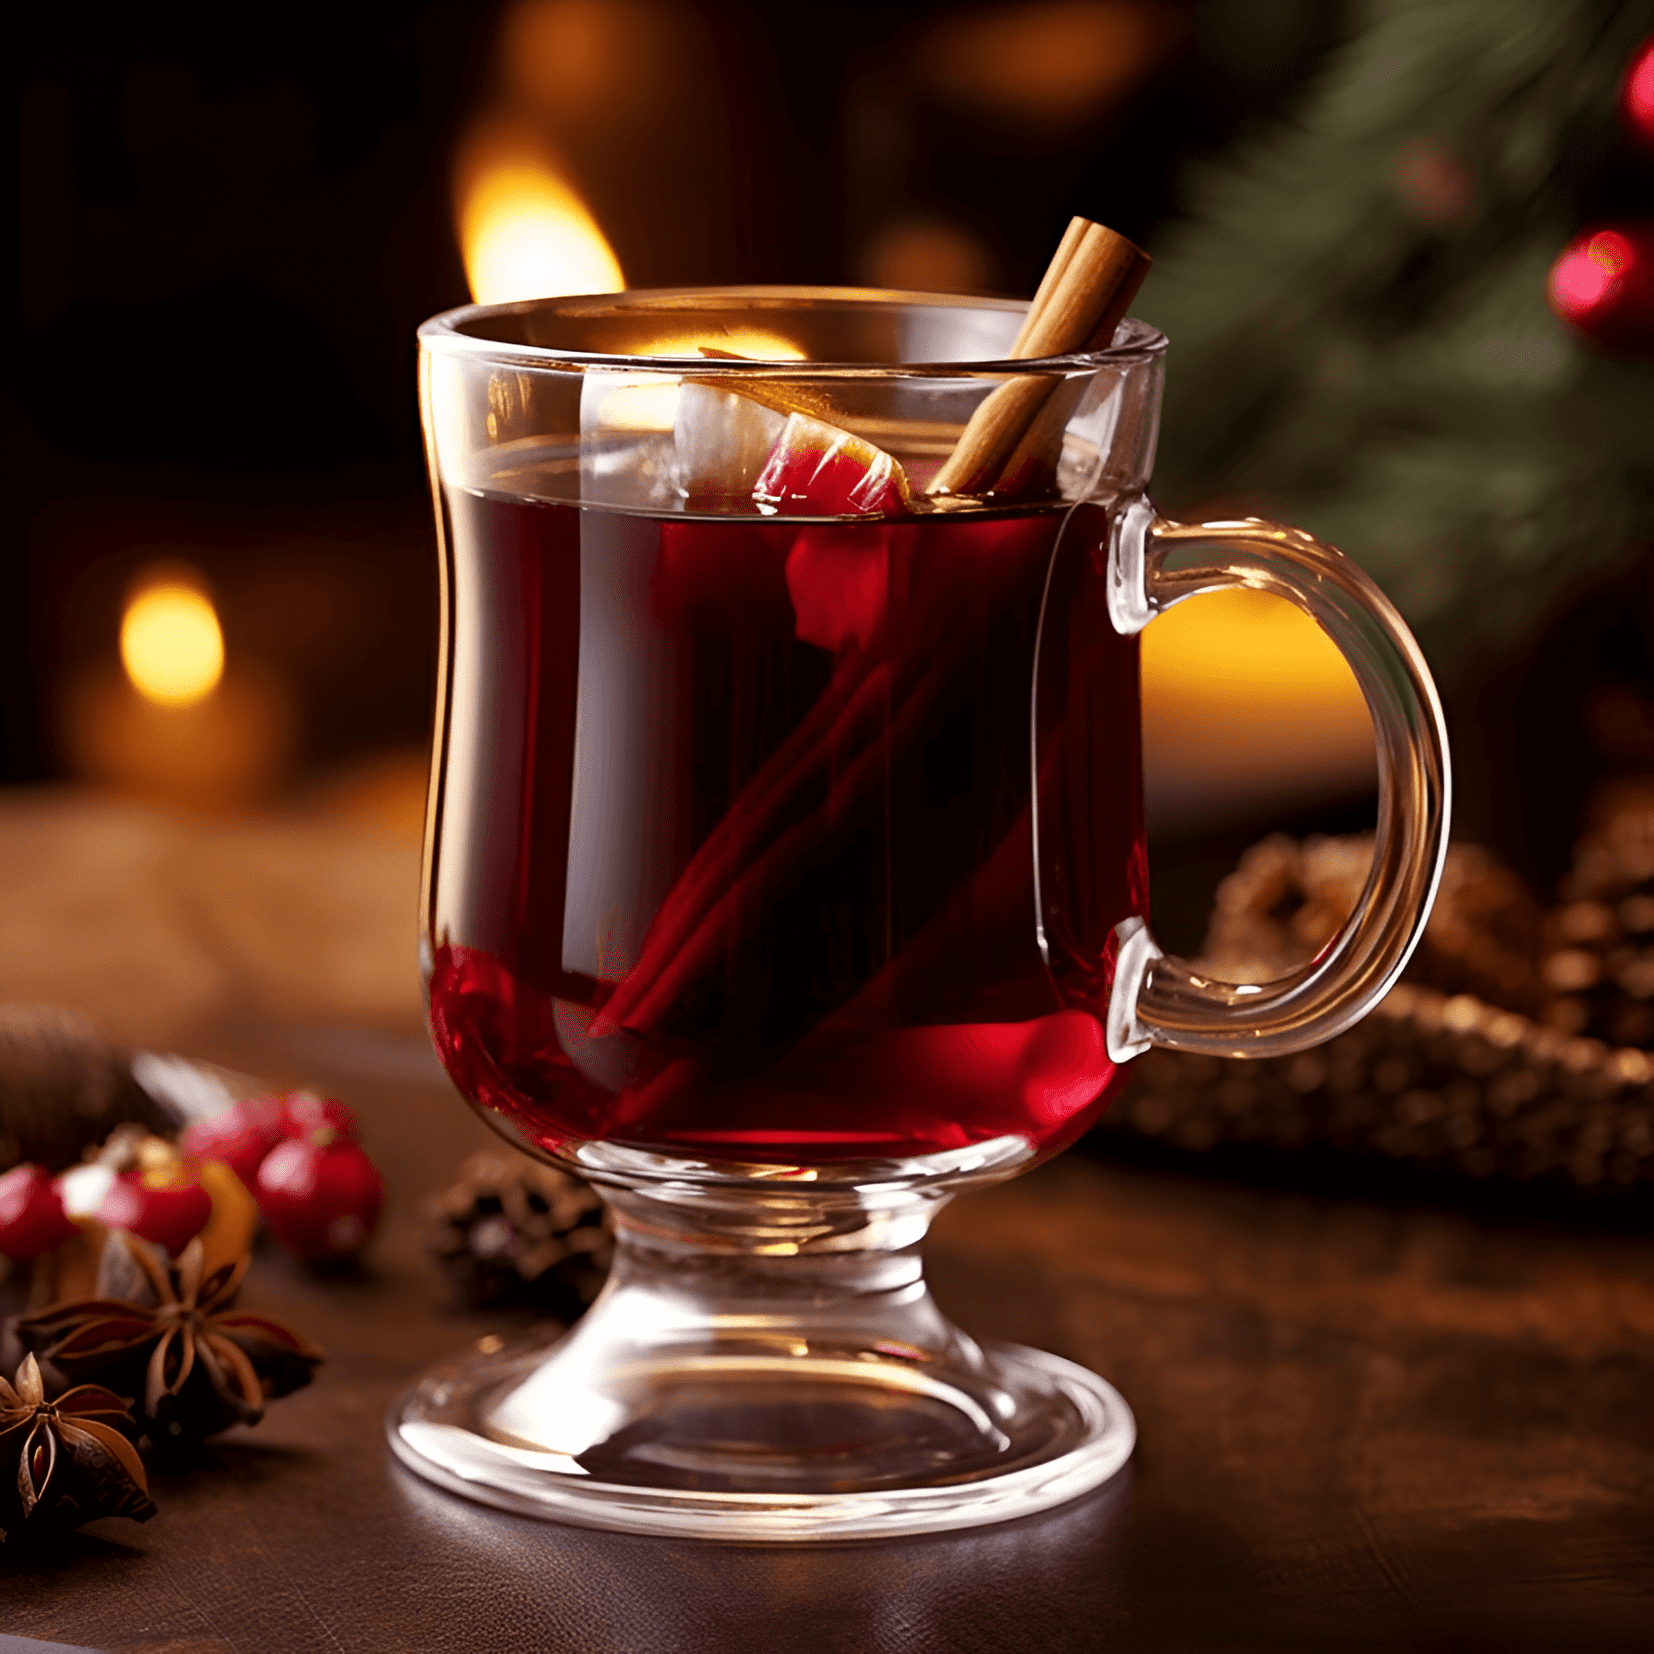 Glogg Cocktail Recipe - Glogg has a warm, spiced, and slightly sweet taste. The combination of red wine, brandy, and spices creates a rich and comforting flavor profile that is perfect for sipping on a cold winter night.